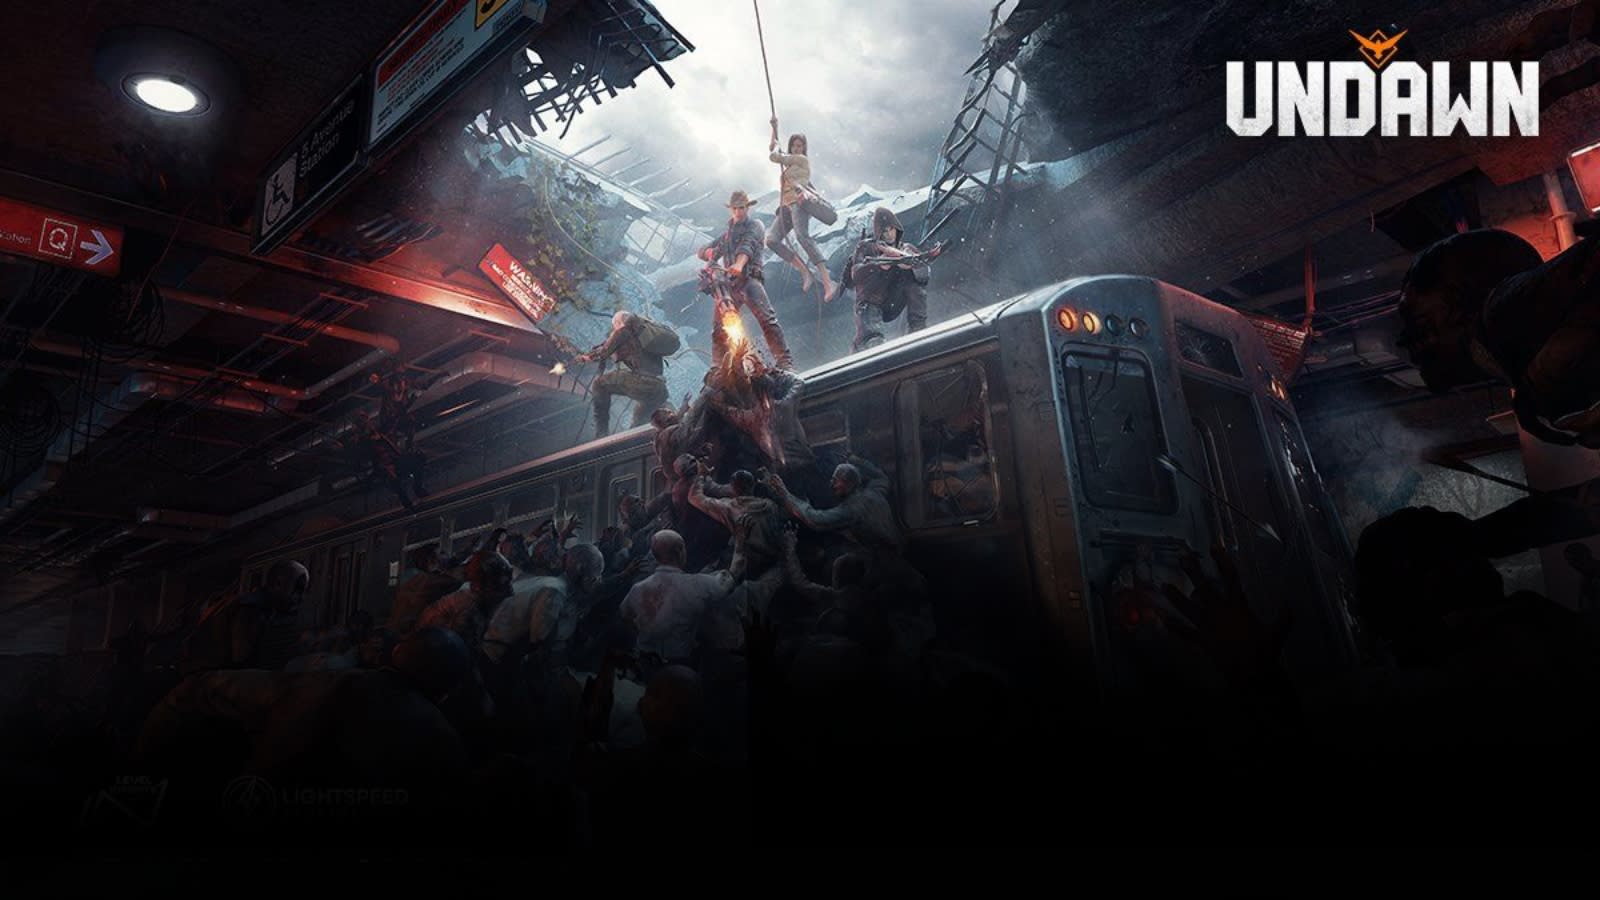 Undawn is Tencent's newest open-world zombie survival shooter to be published by Garena in Southeast Asia. (Photo: Garena, Tencent)